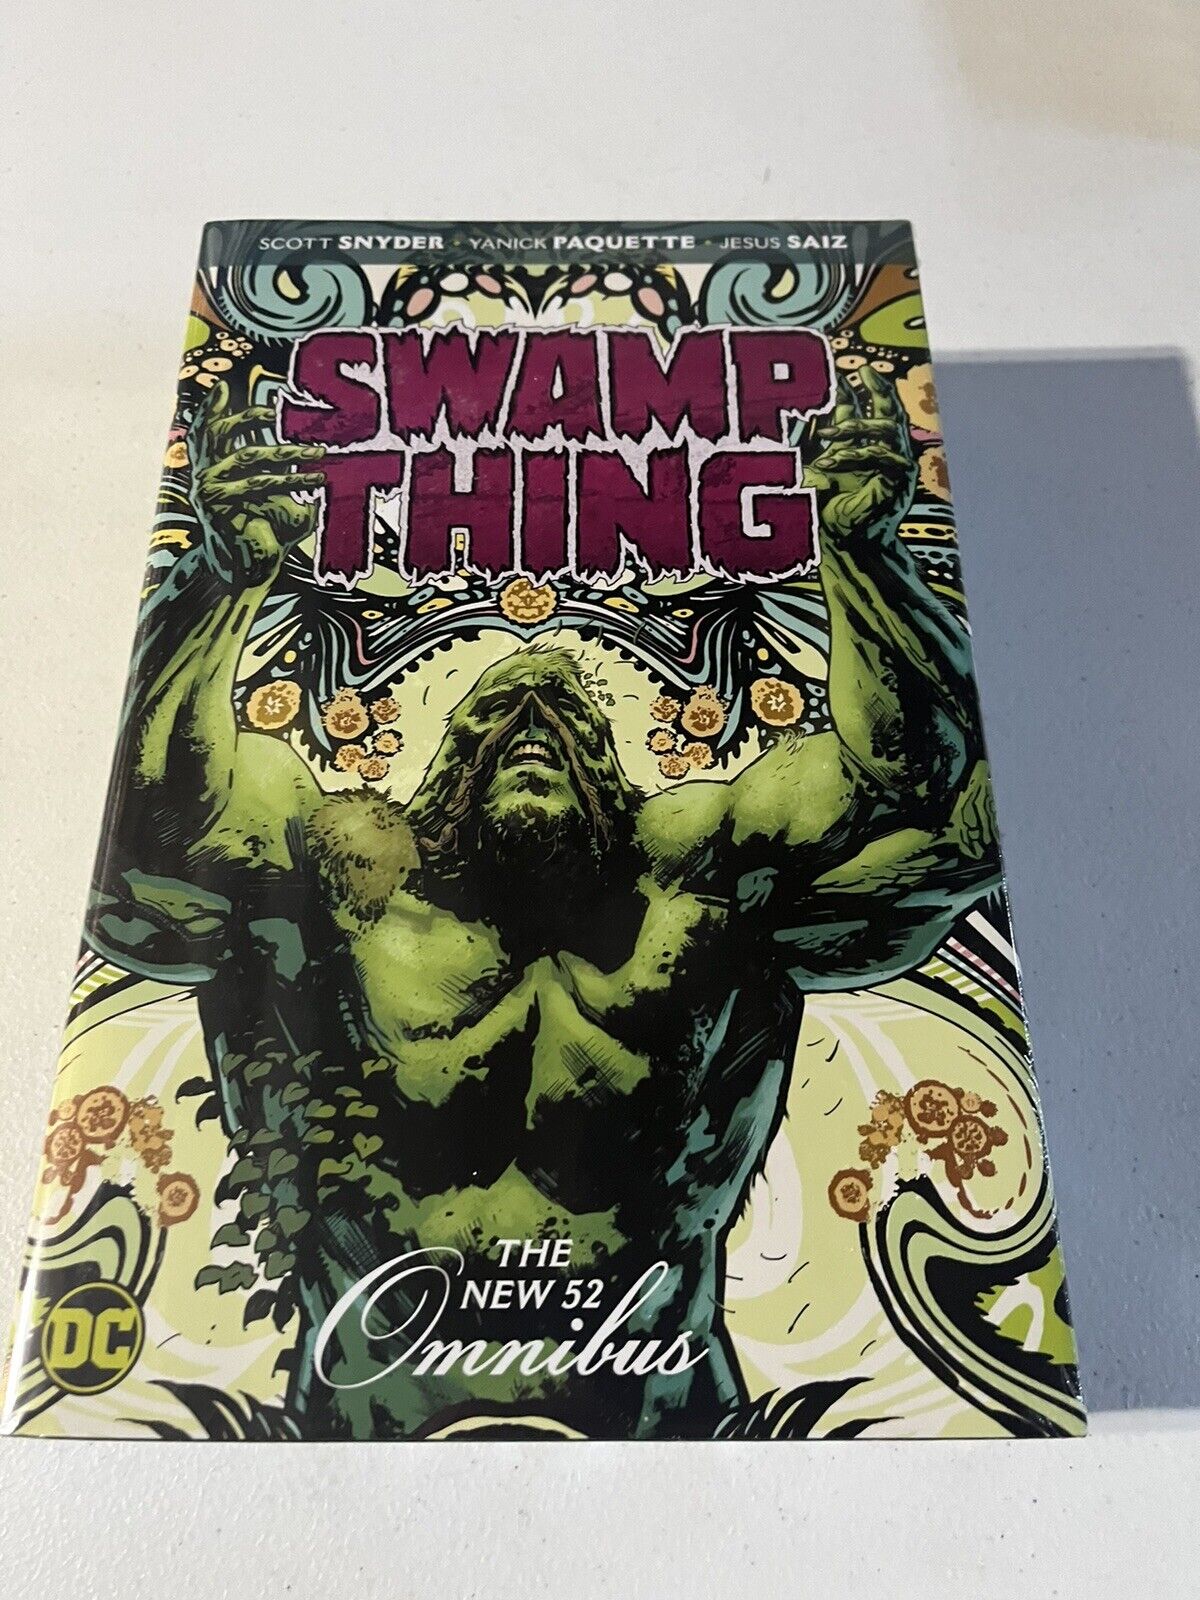 DC Swamp Thing New 52 Omnibus New, Sealed Hardcover Scott Snyder - Charles Soule